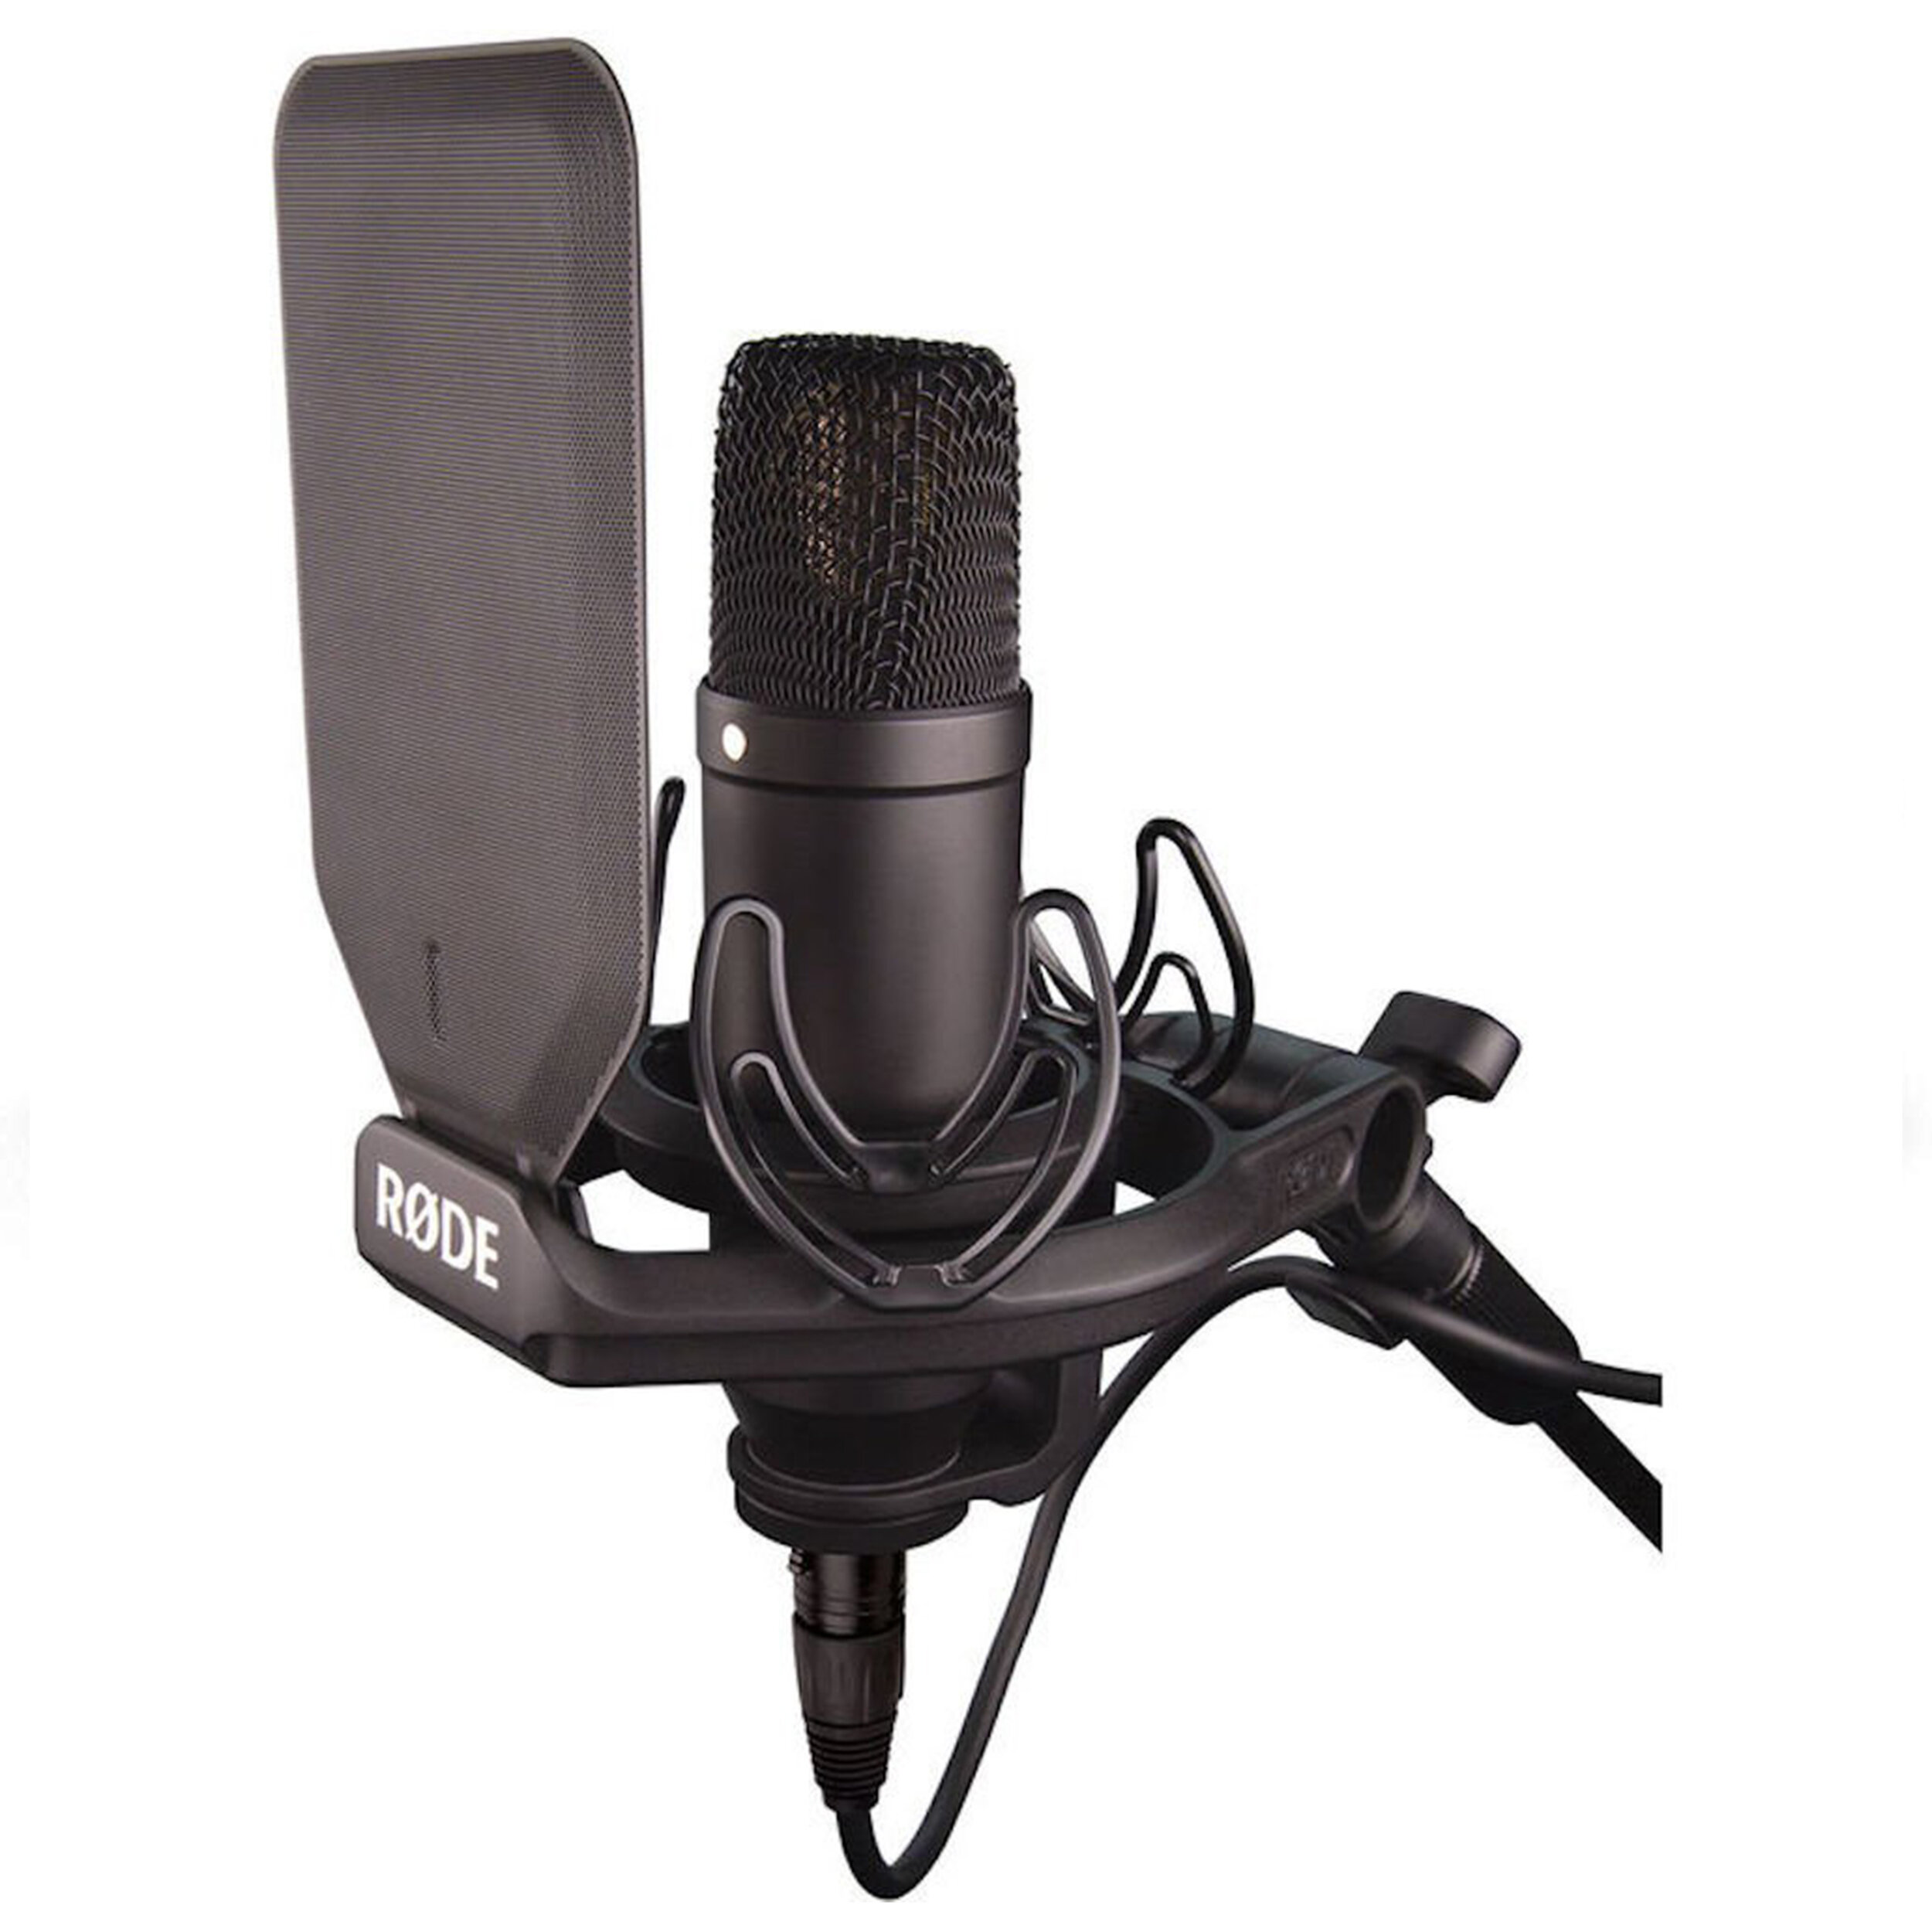 2x Rode NT1 Microphone